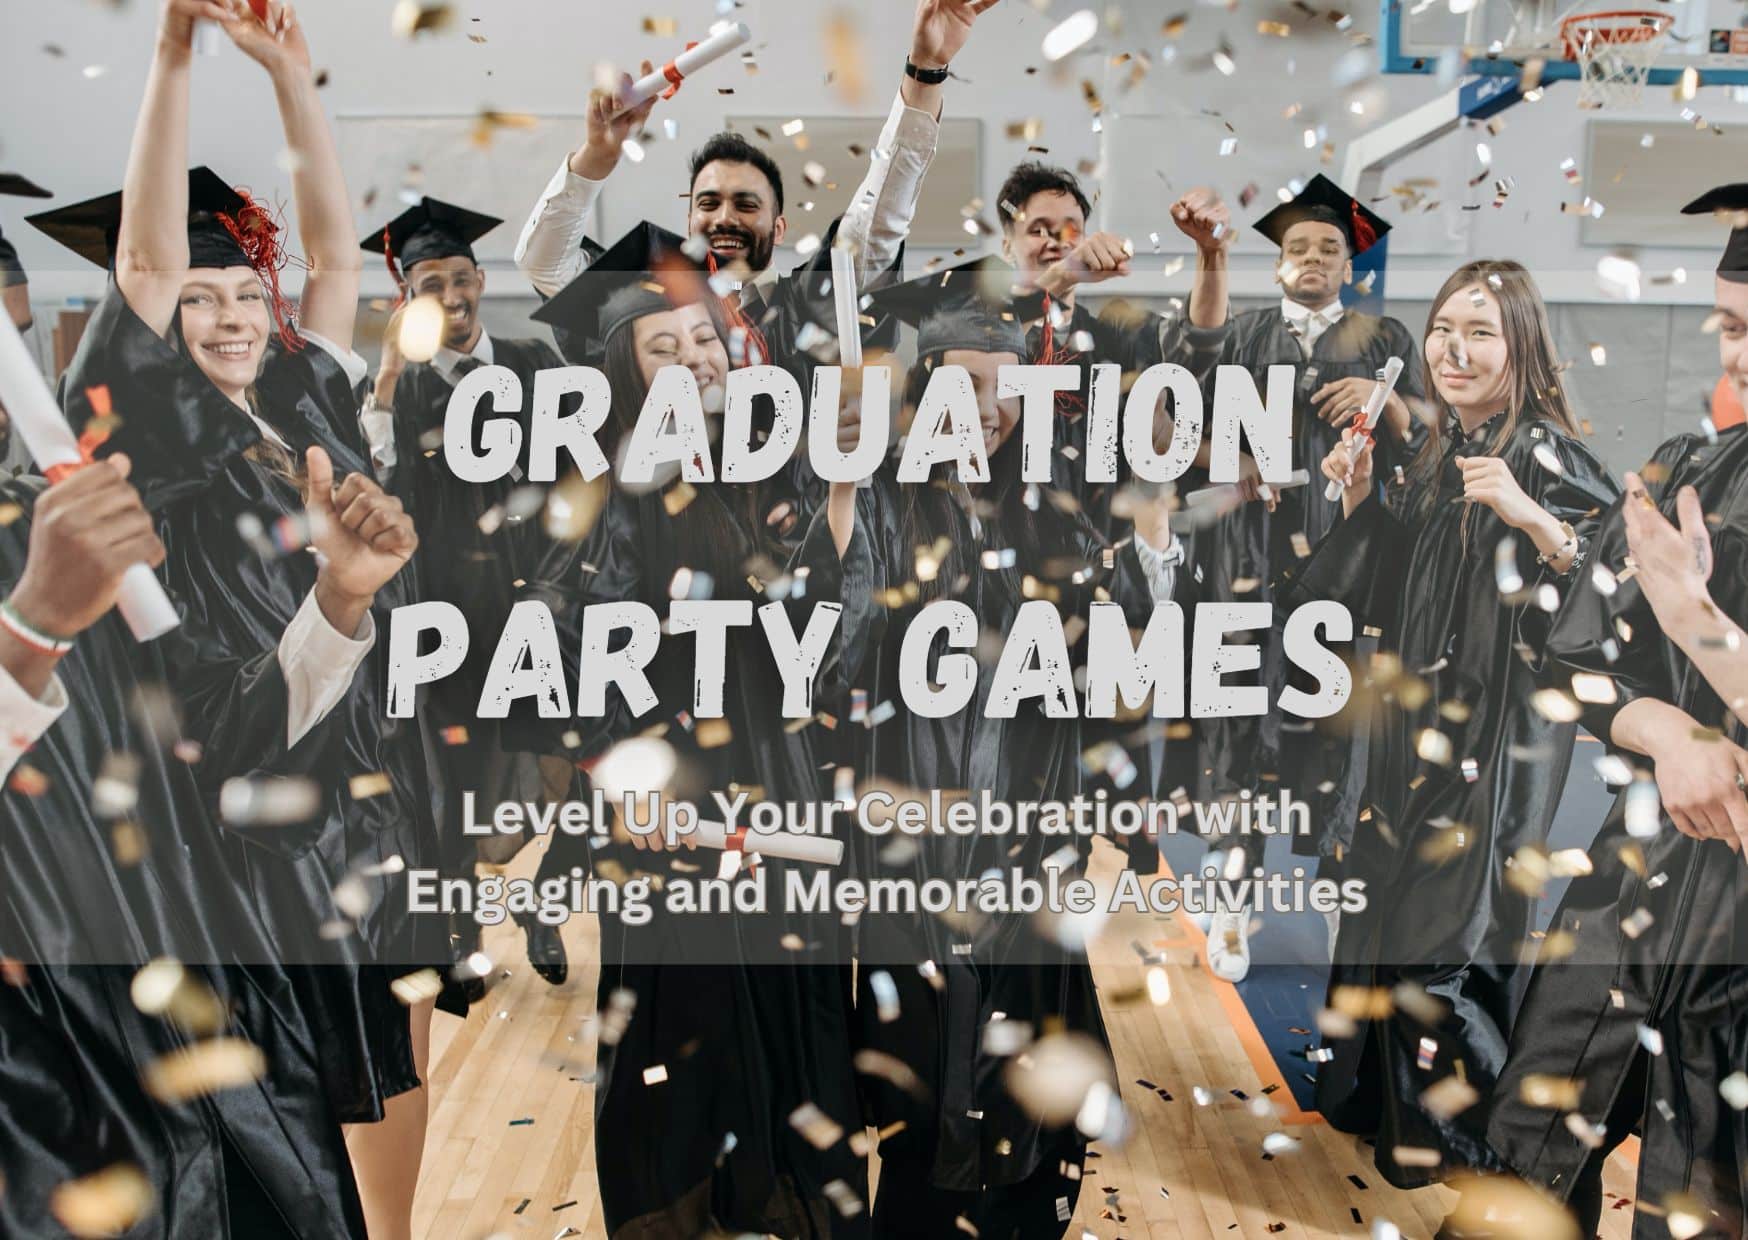 Graduation Party Games - Level Up Your Celebration With Engaging And Memorable Activities